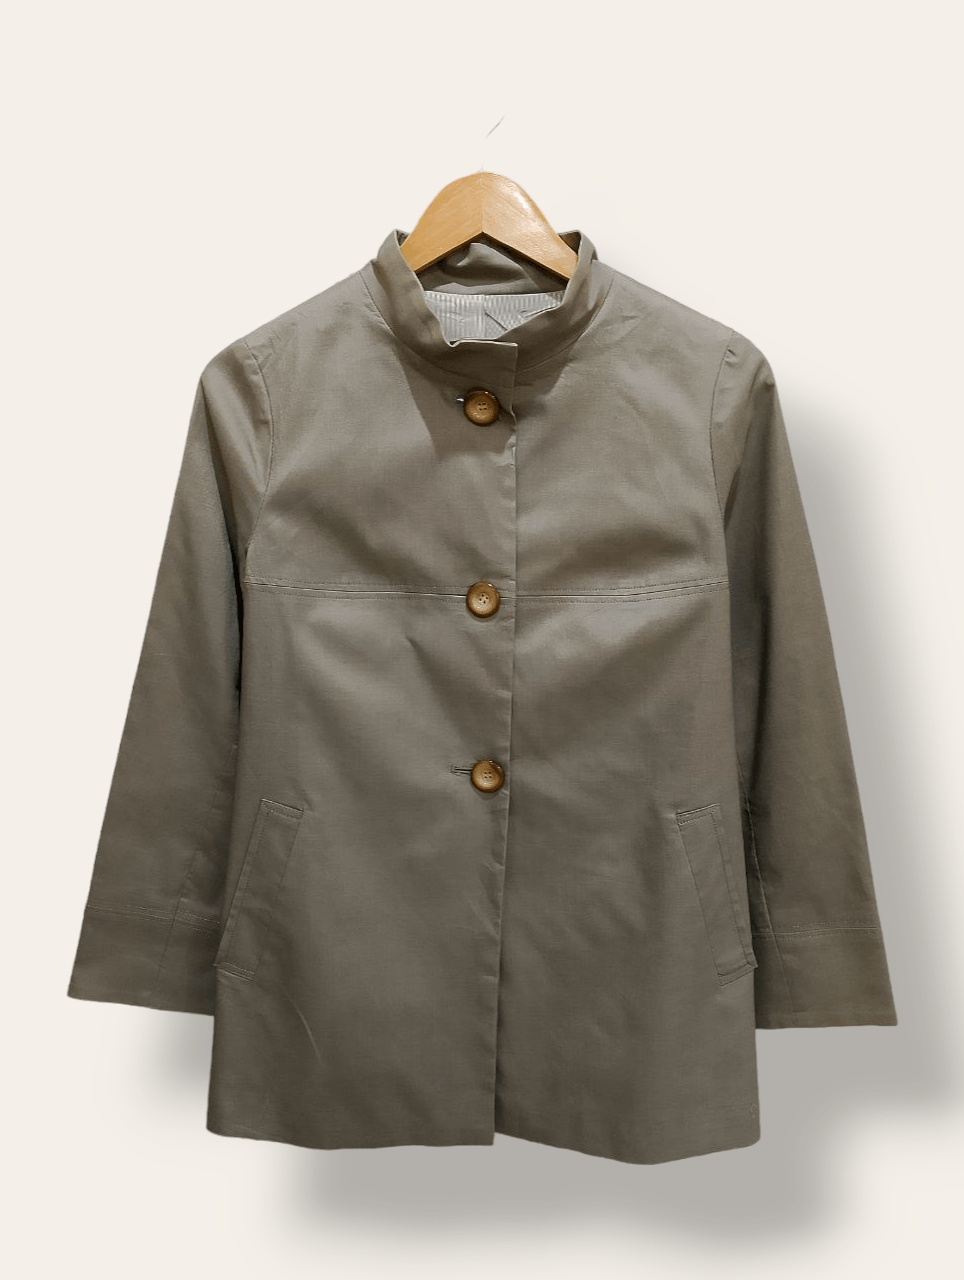 Archival Clothing - Creel Horaire Made in Japan Button Up Casual Jacket - 1